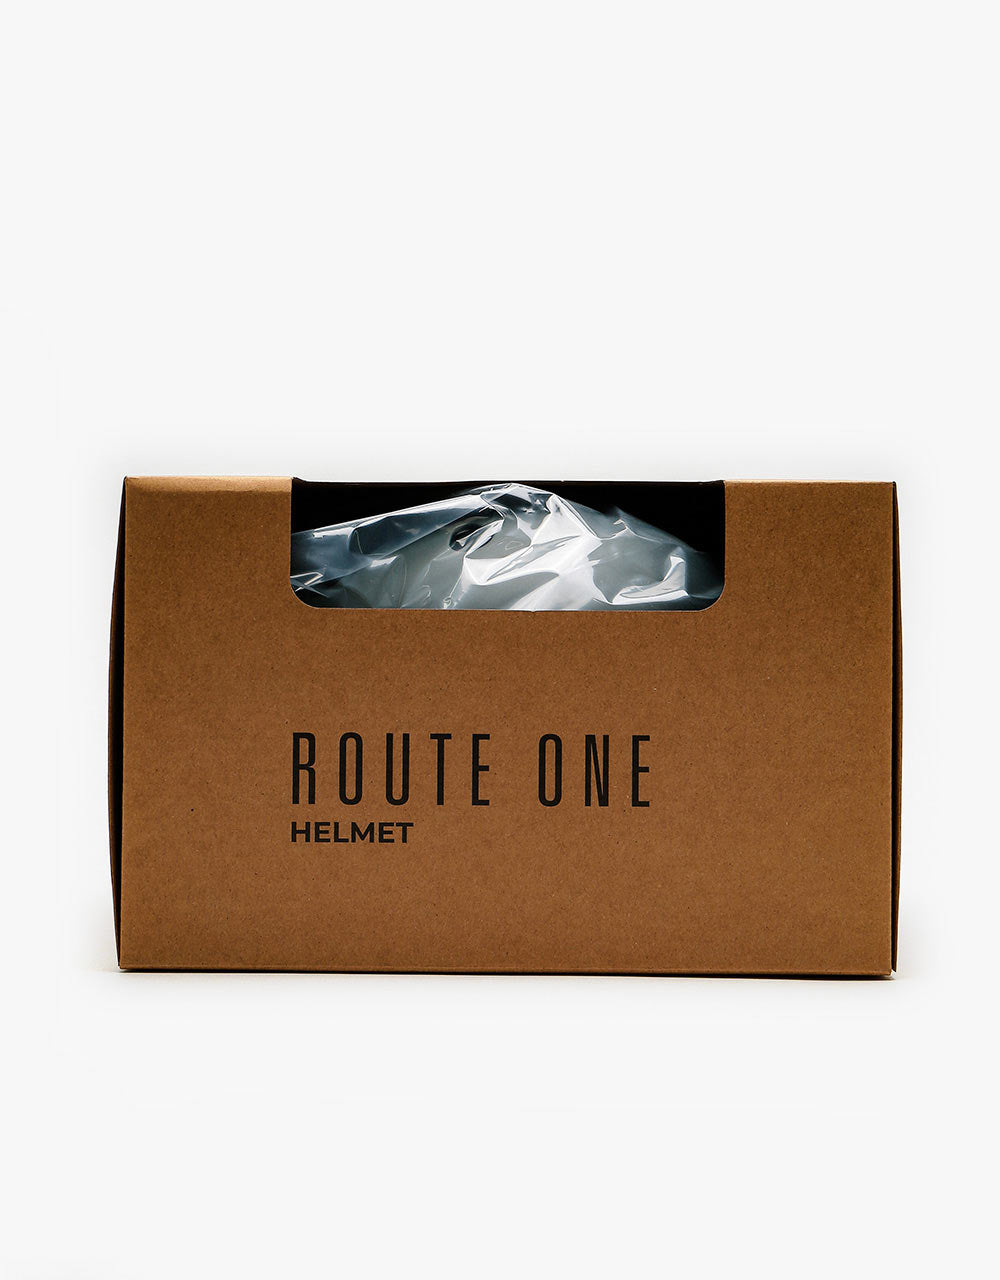 Route One Classic Helmet - Matte Charcoal